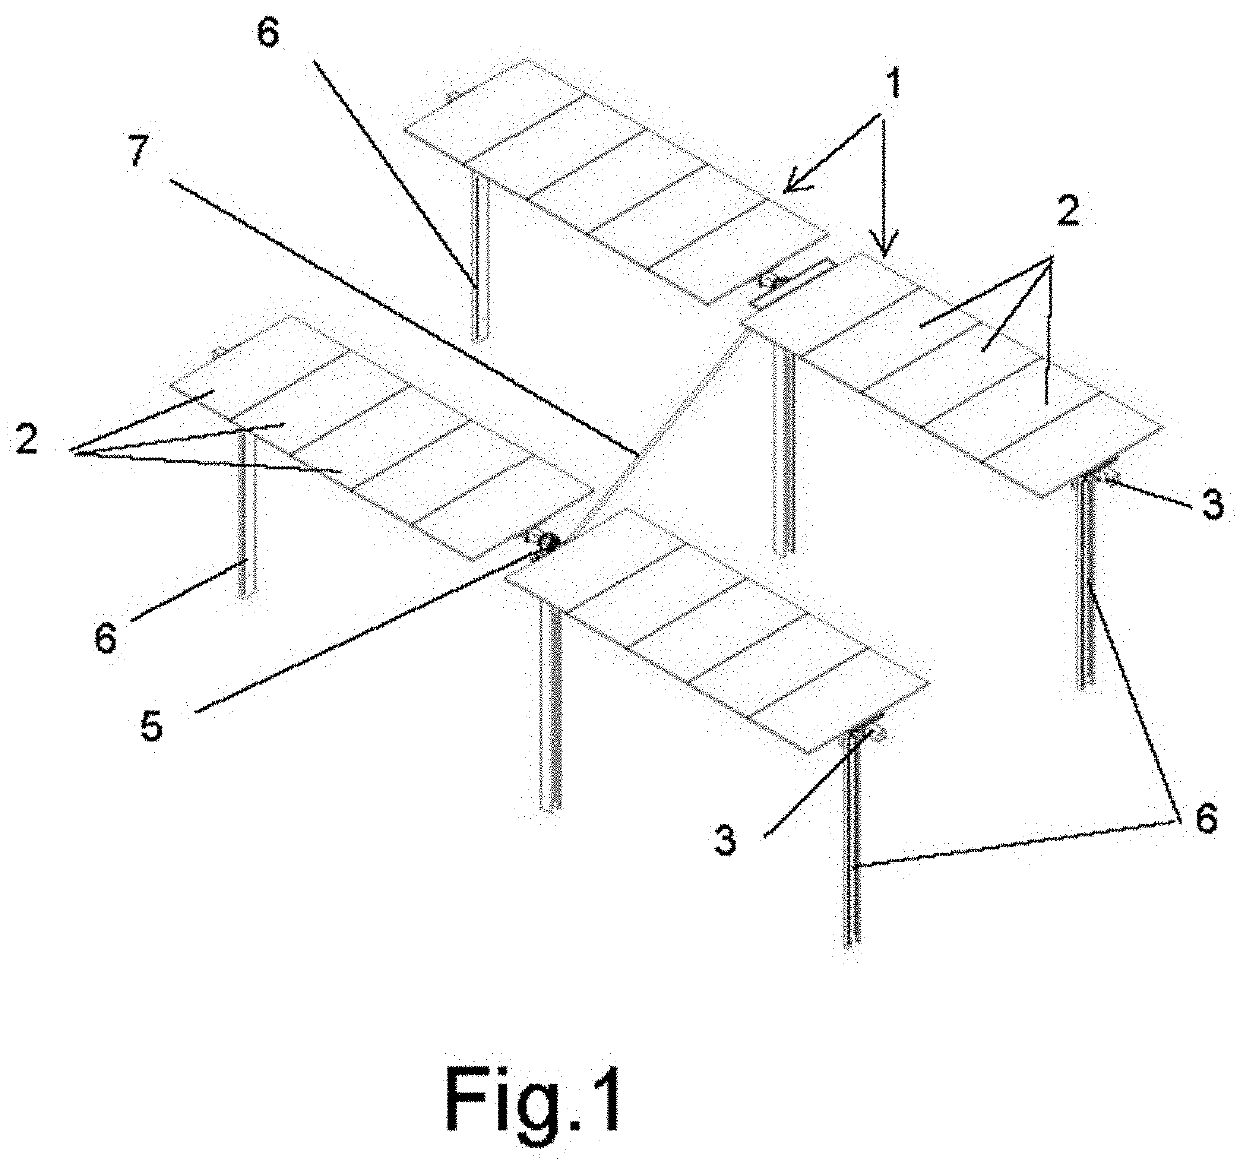 Solar tracker with orientable solar panels arranged in rows